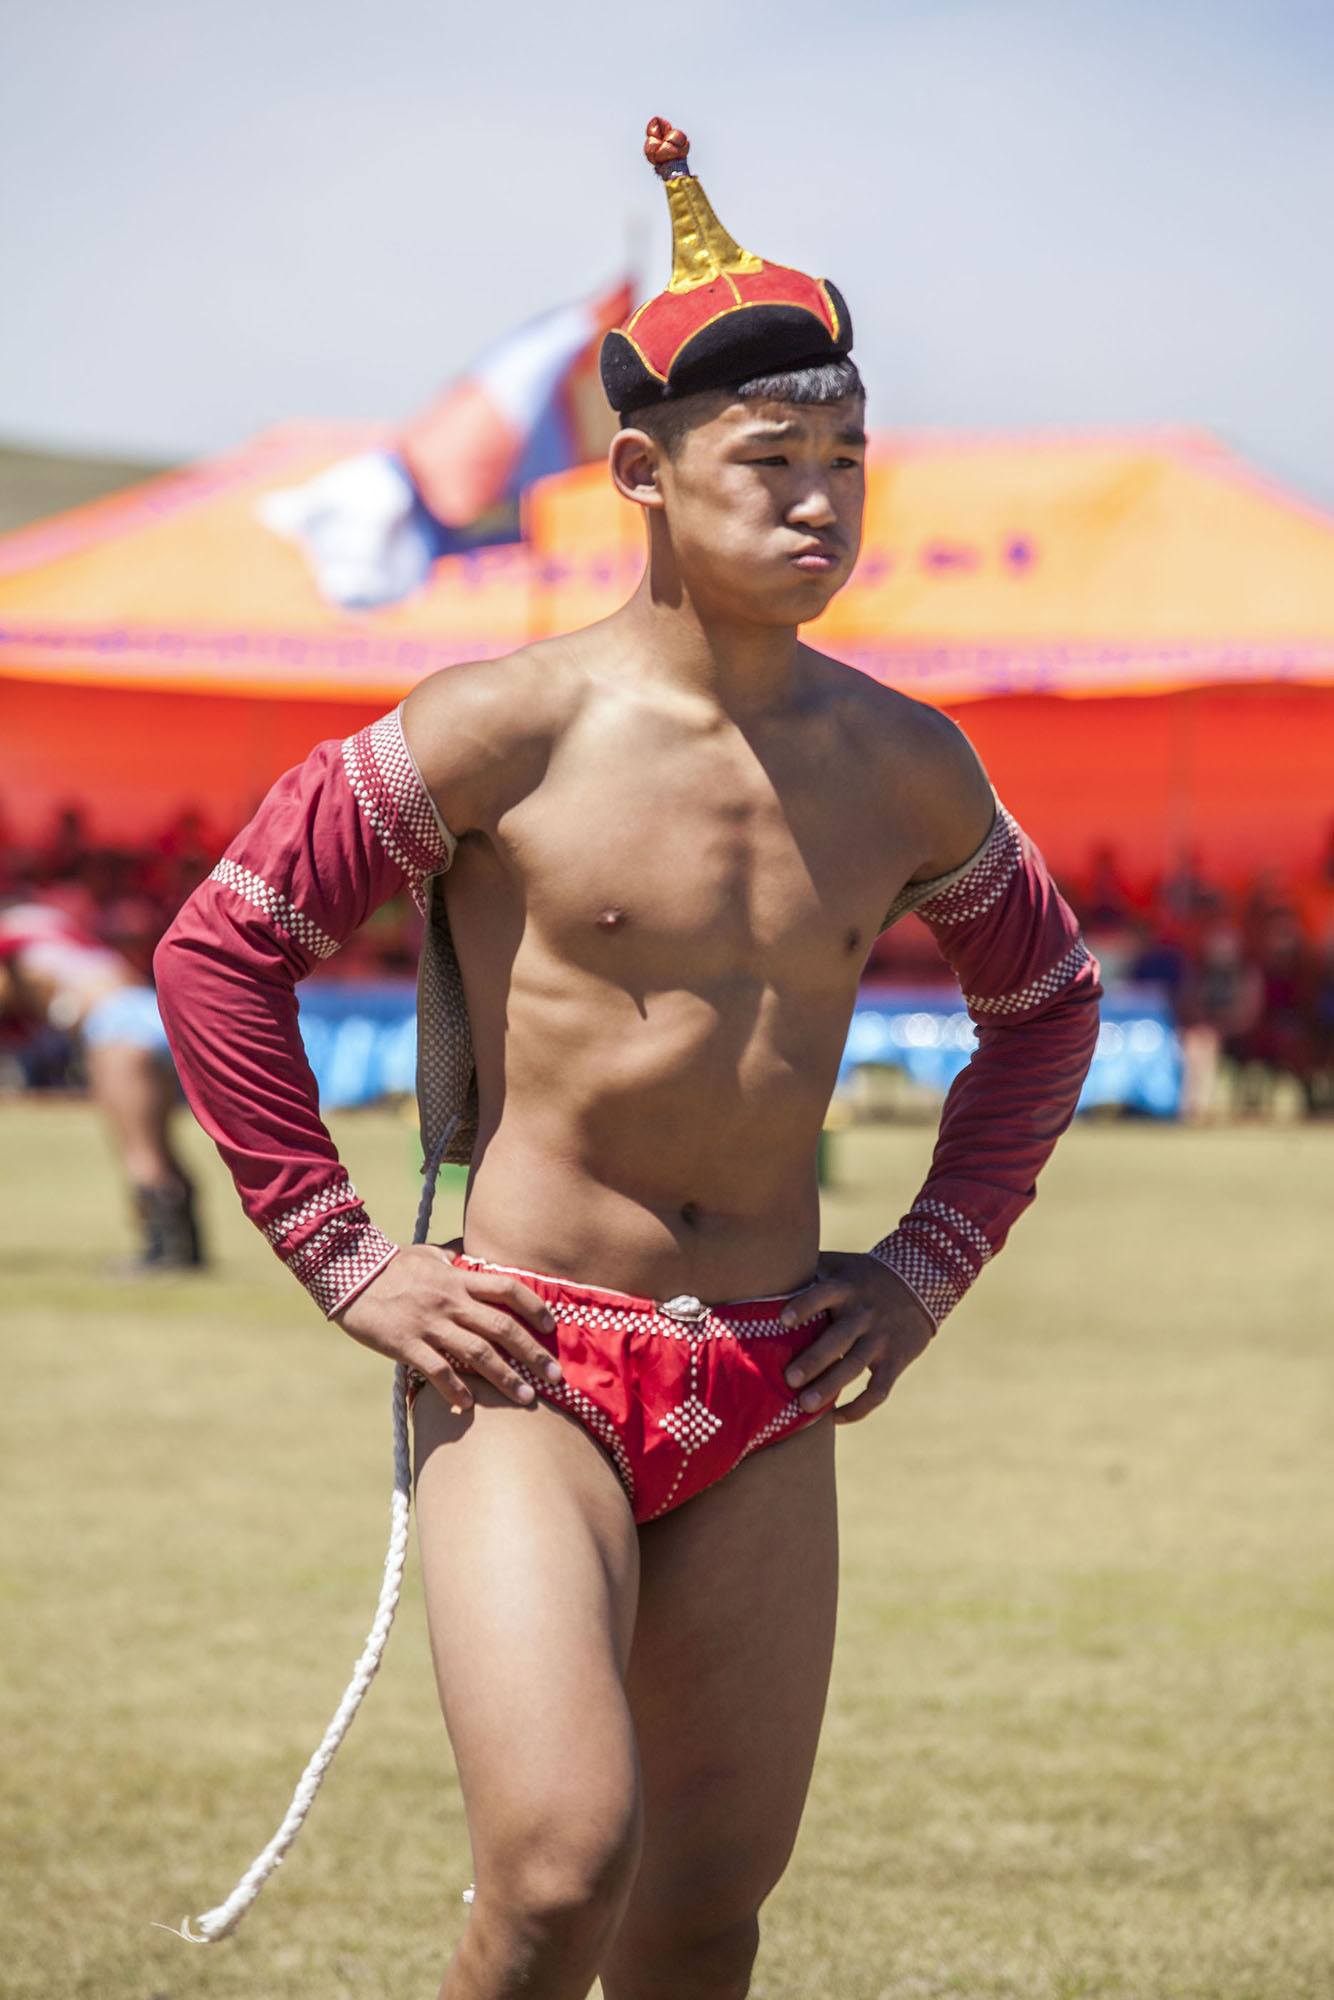 Mongolian wrestler with tired face after wrestling